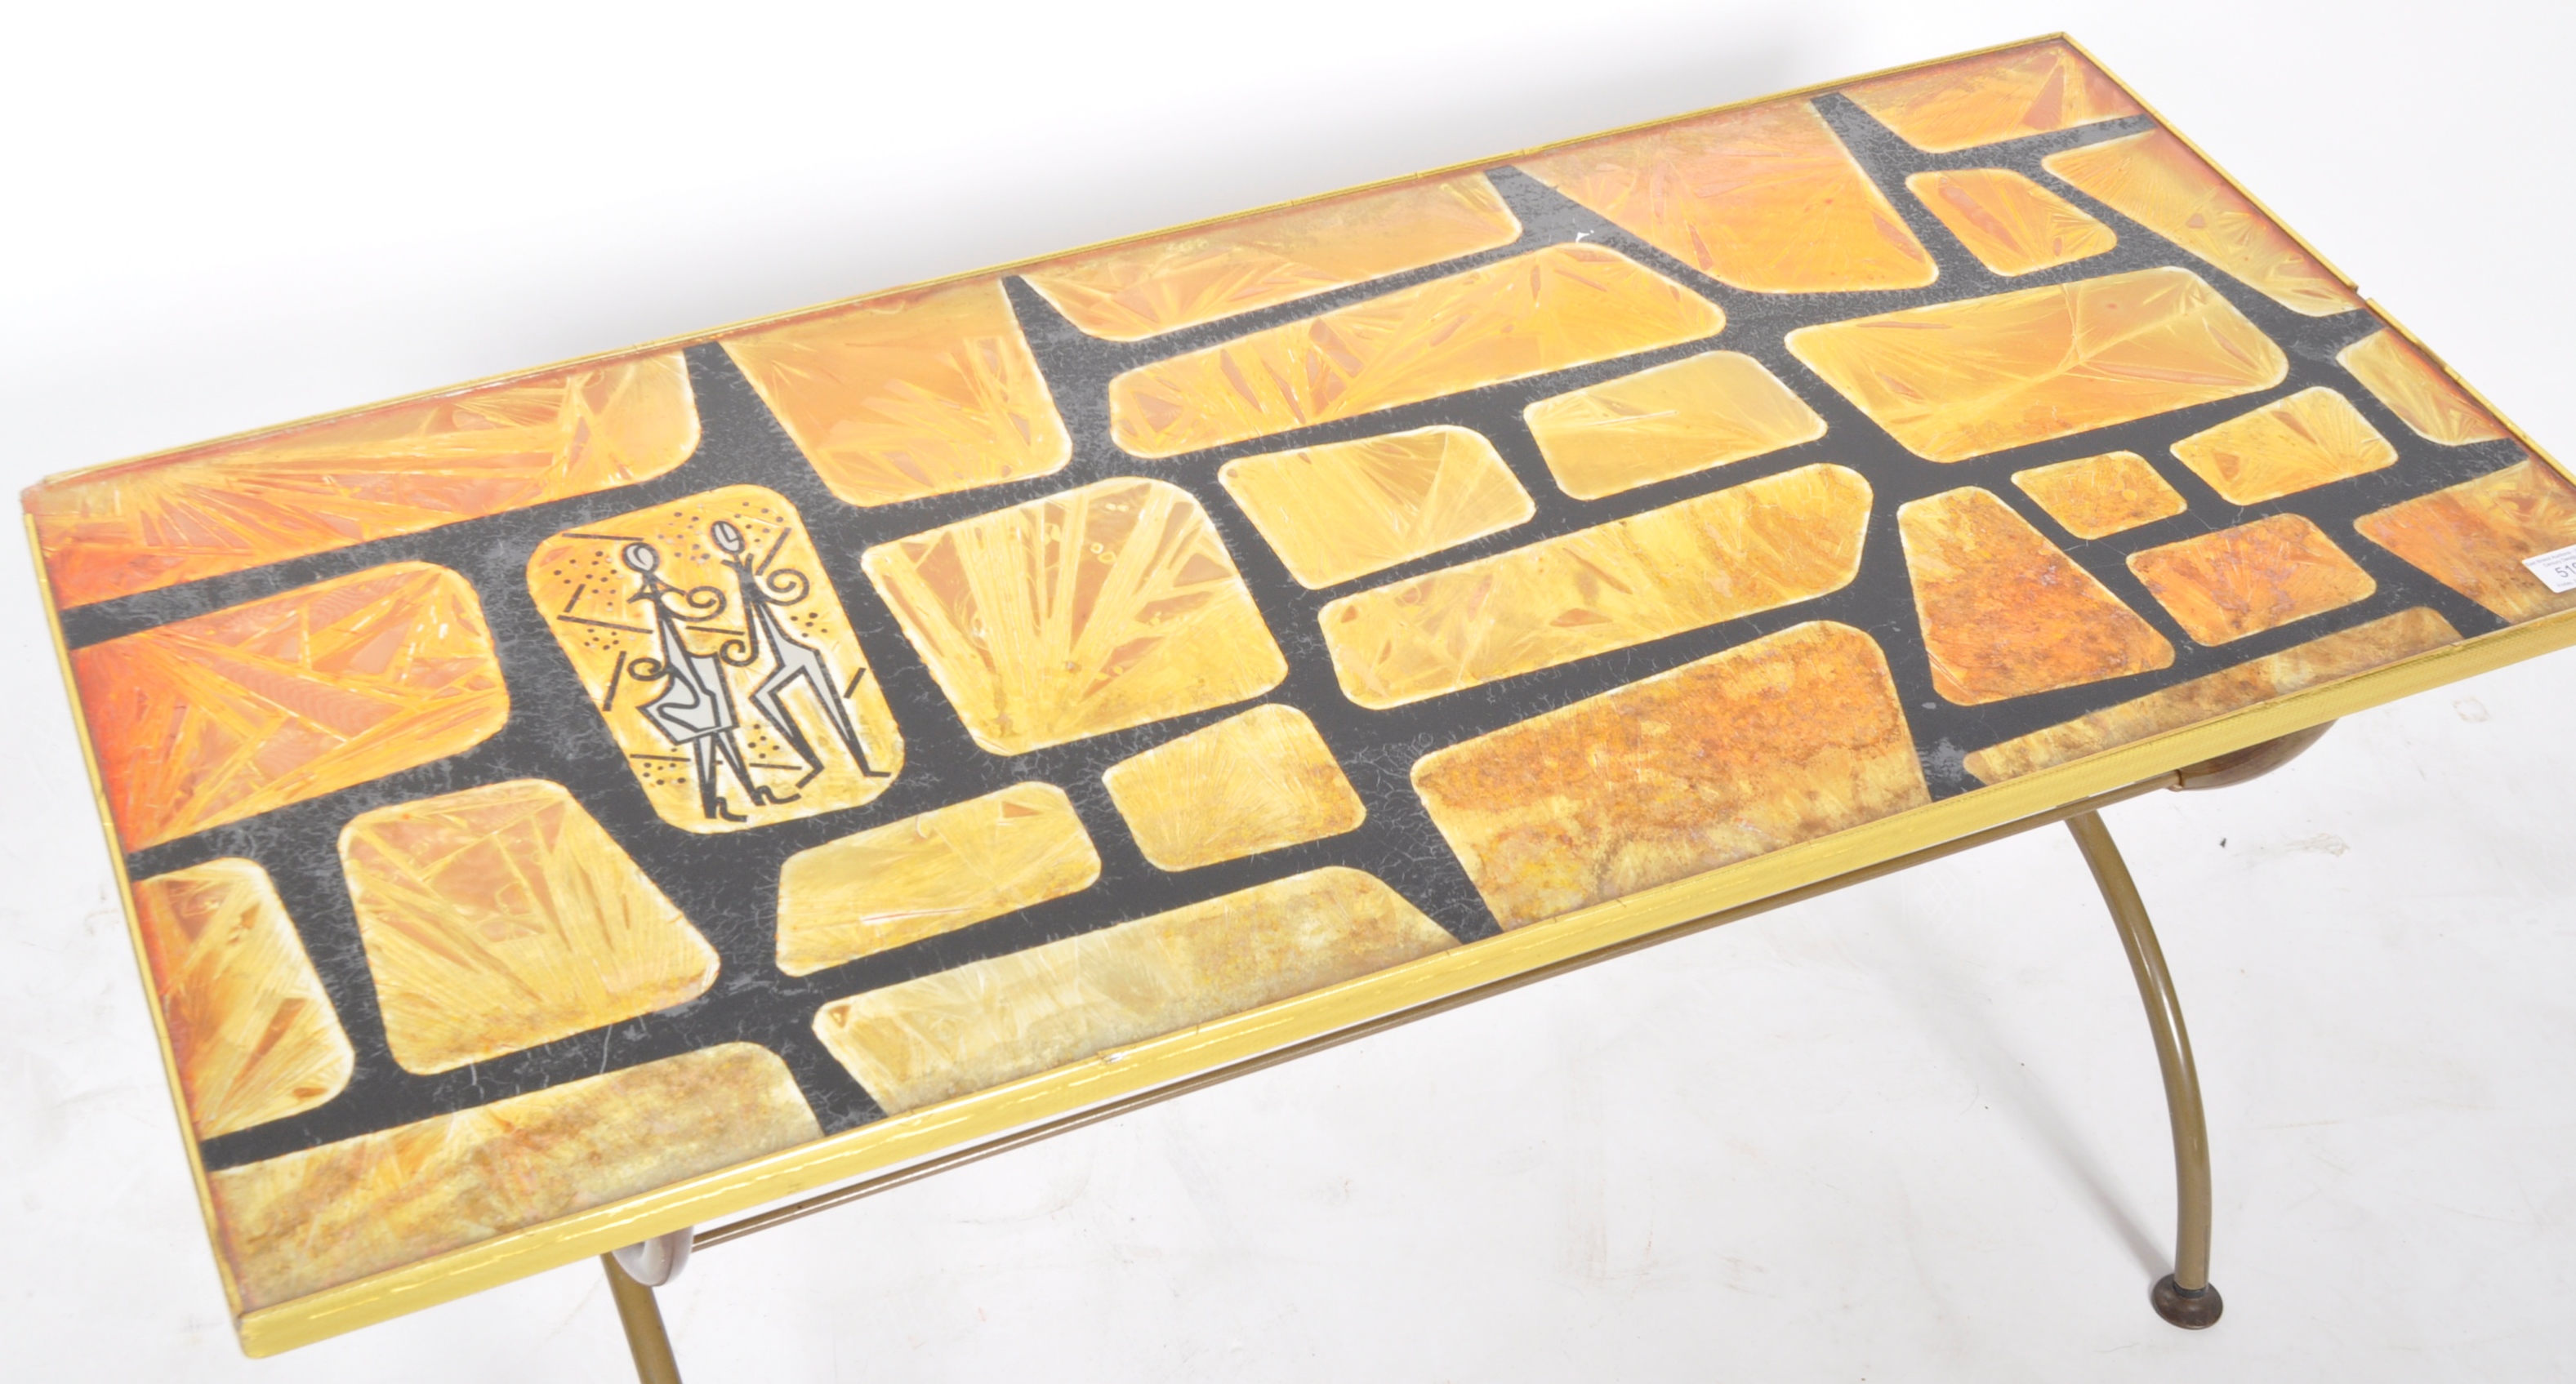 DENMOR OF LONDON - MID CENTURY METAL AND GLASS COFFEE TABLE - Image 3 of 6